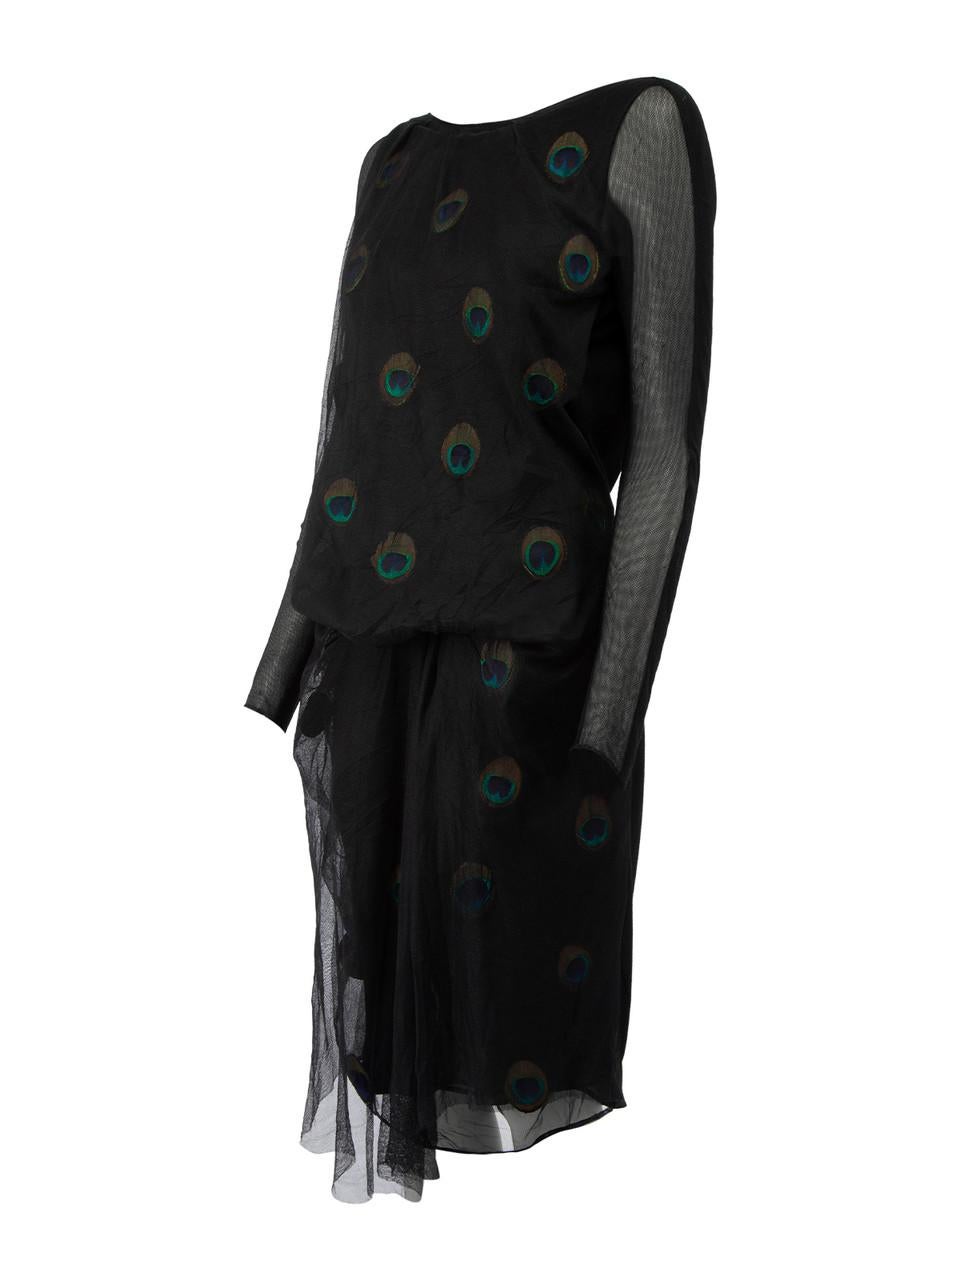 Black Peacock Long Sleeves Dress Size L For Sale 1